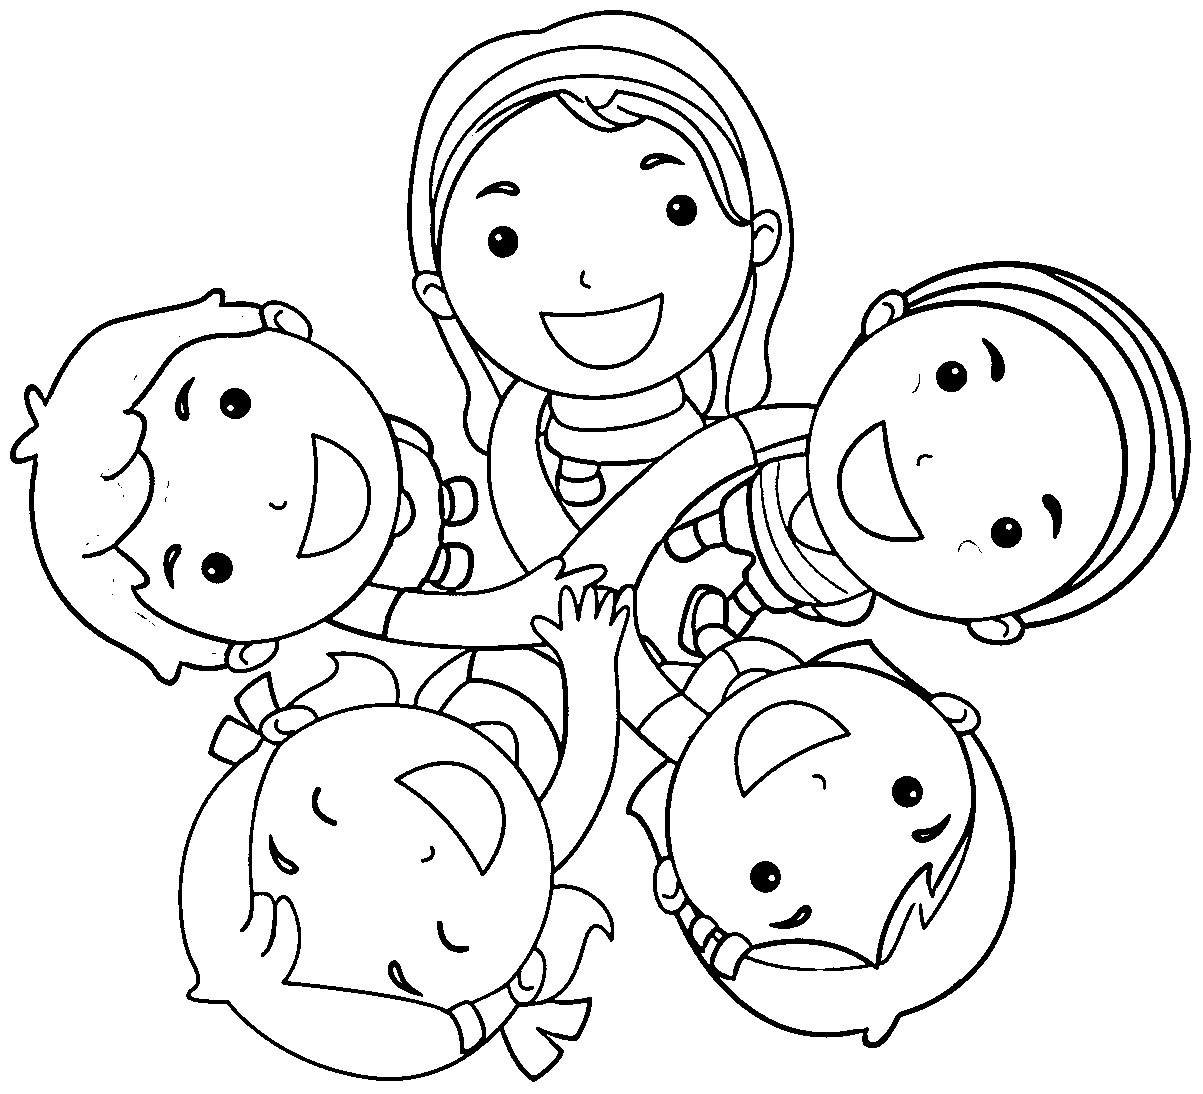 Best Coloring Books For Toddlers
 Best Friends Coloring Pages Best Coloring Pages For Kids